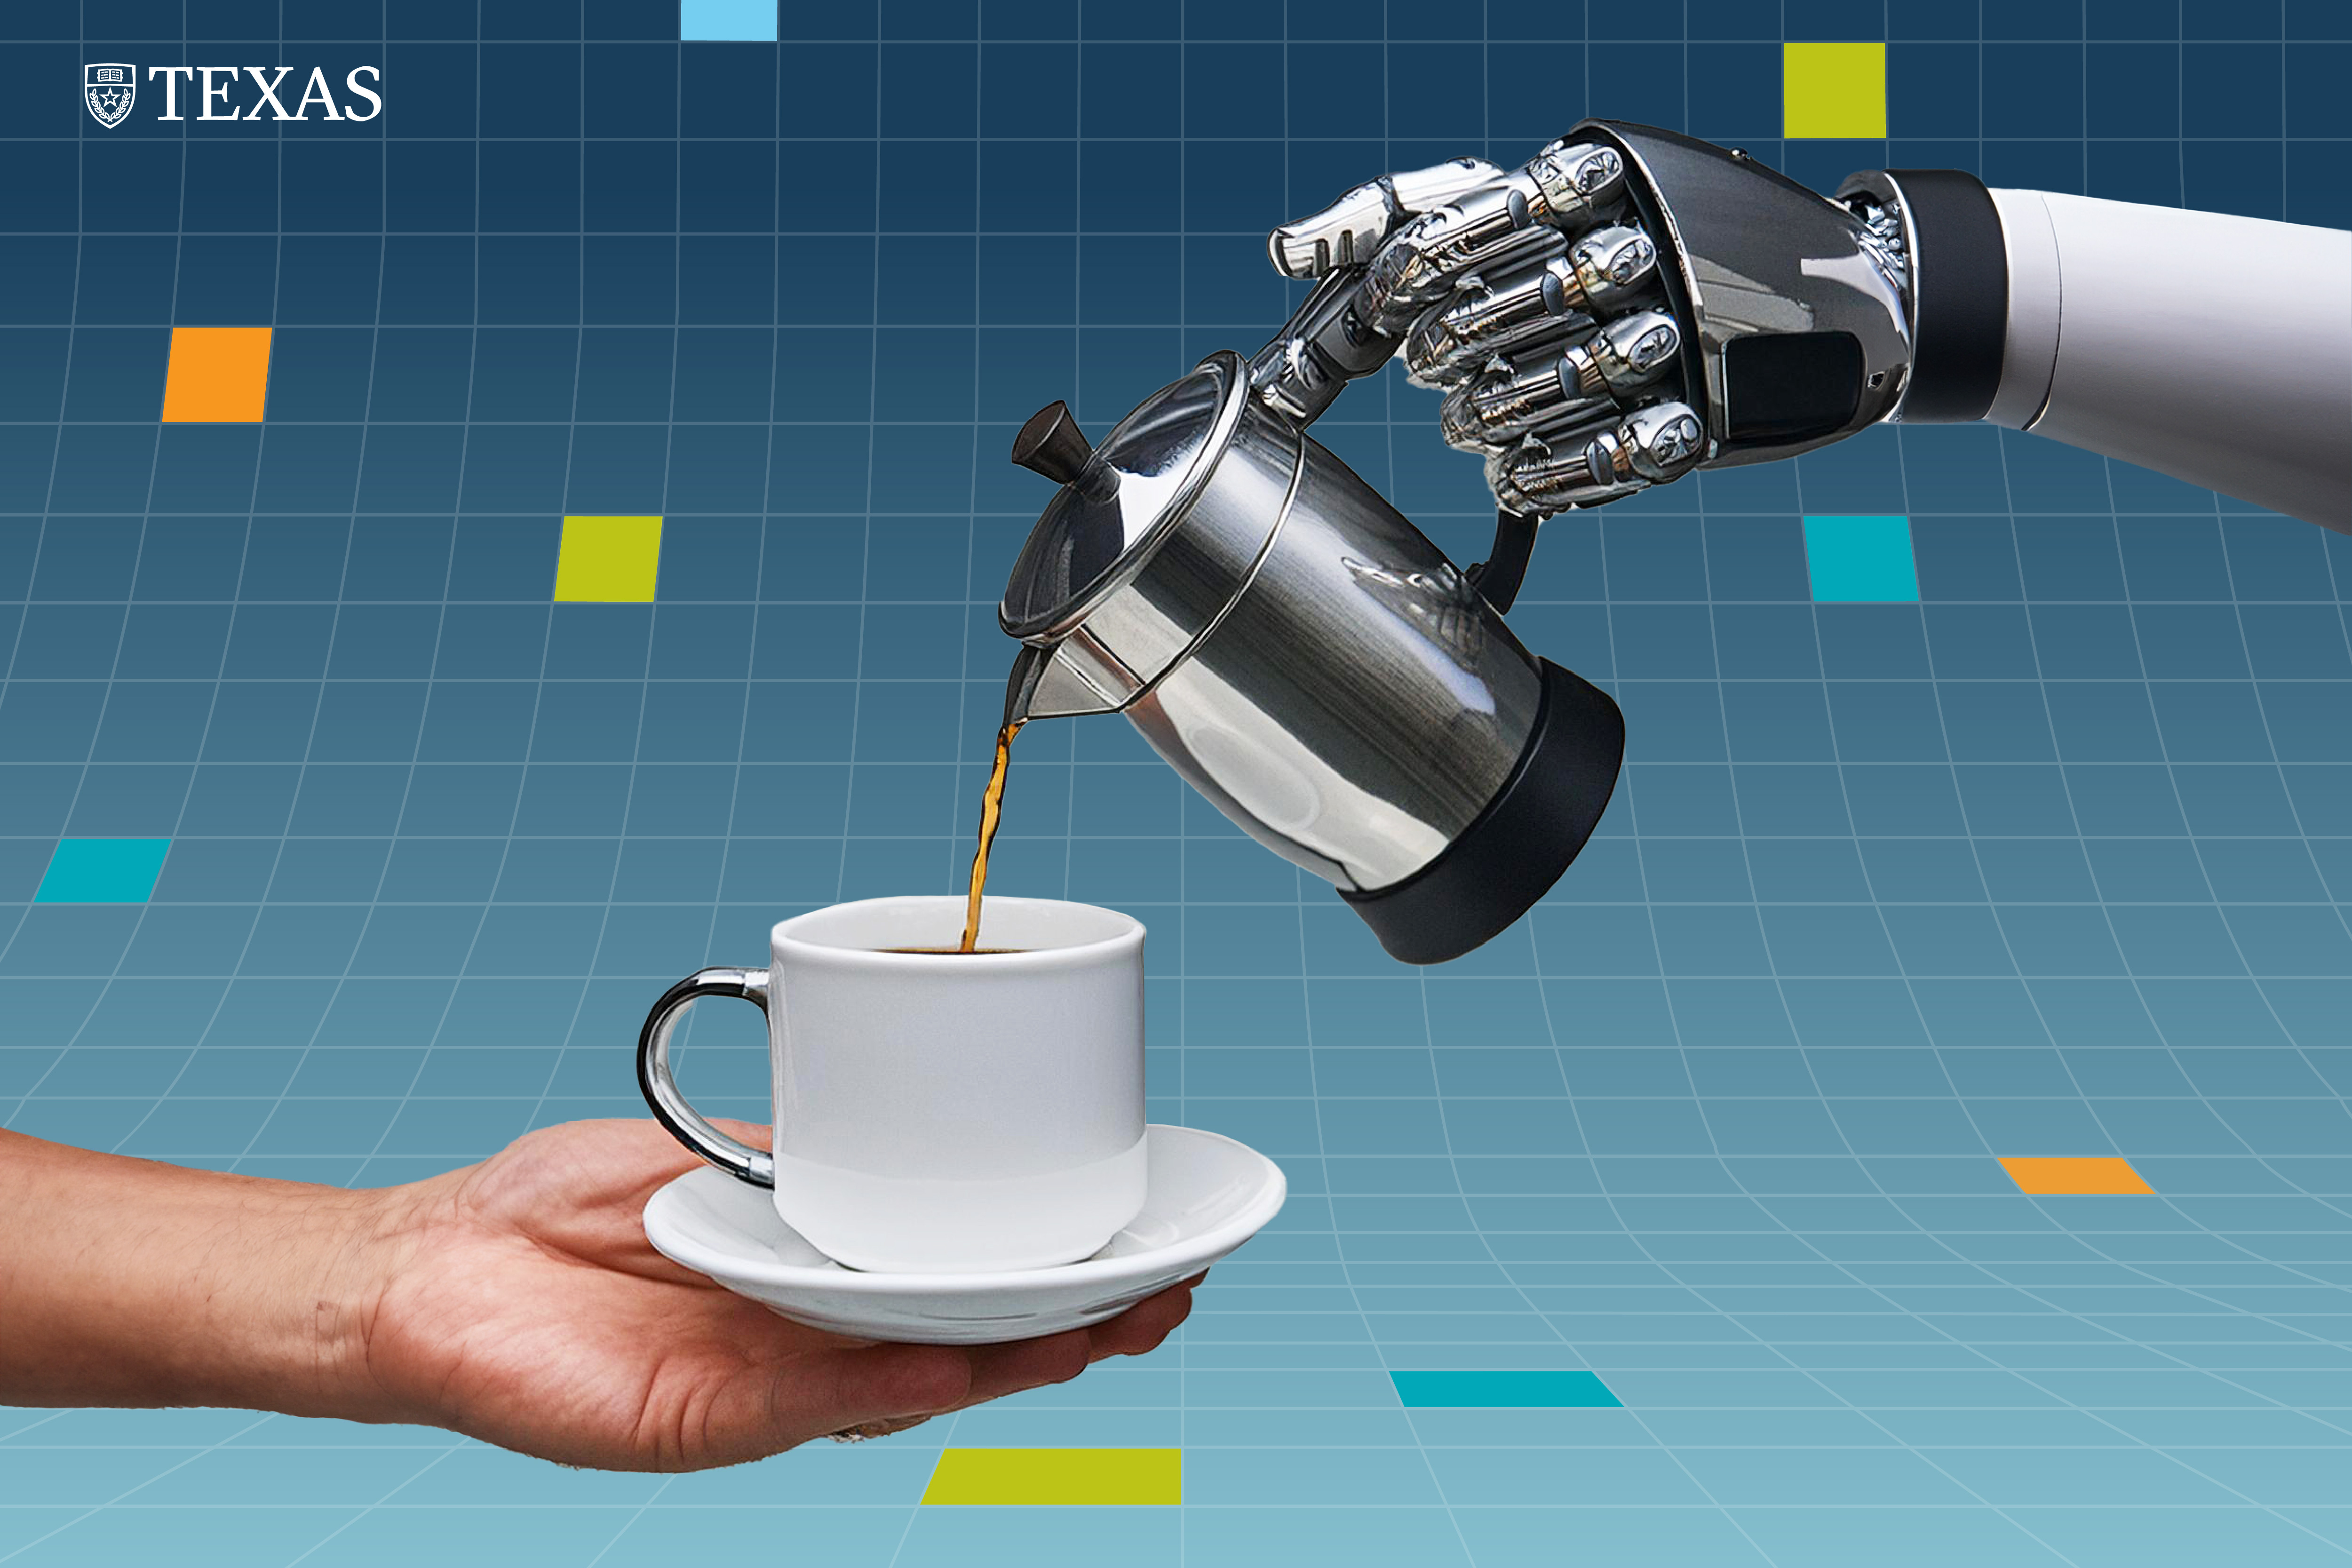 A robotic hand pours coffee into a mug being held by a human hand